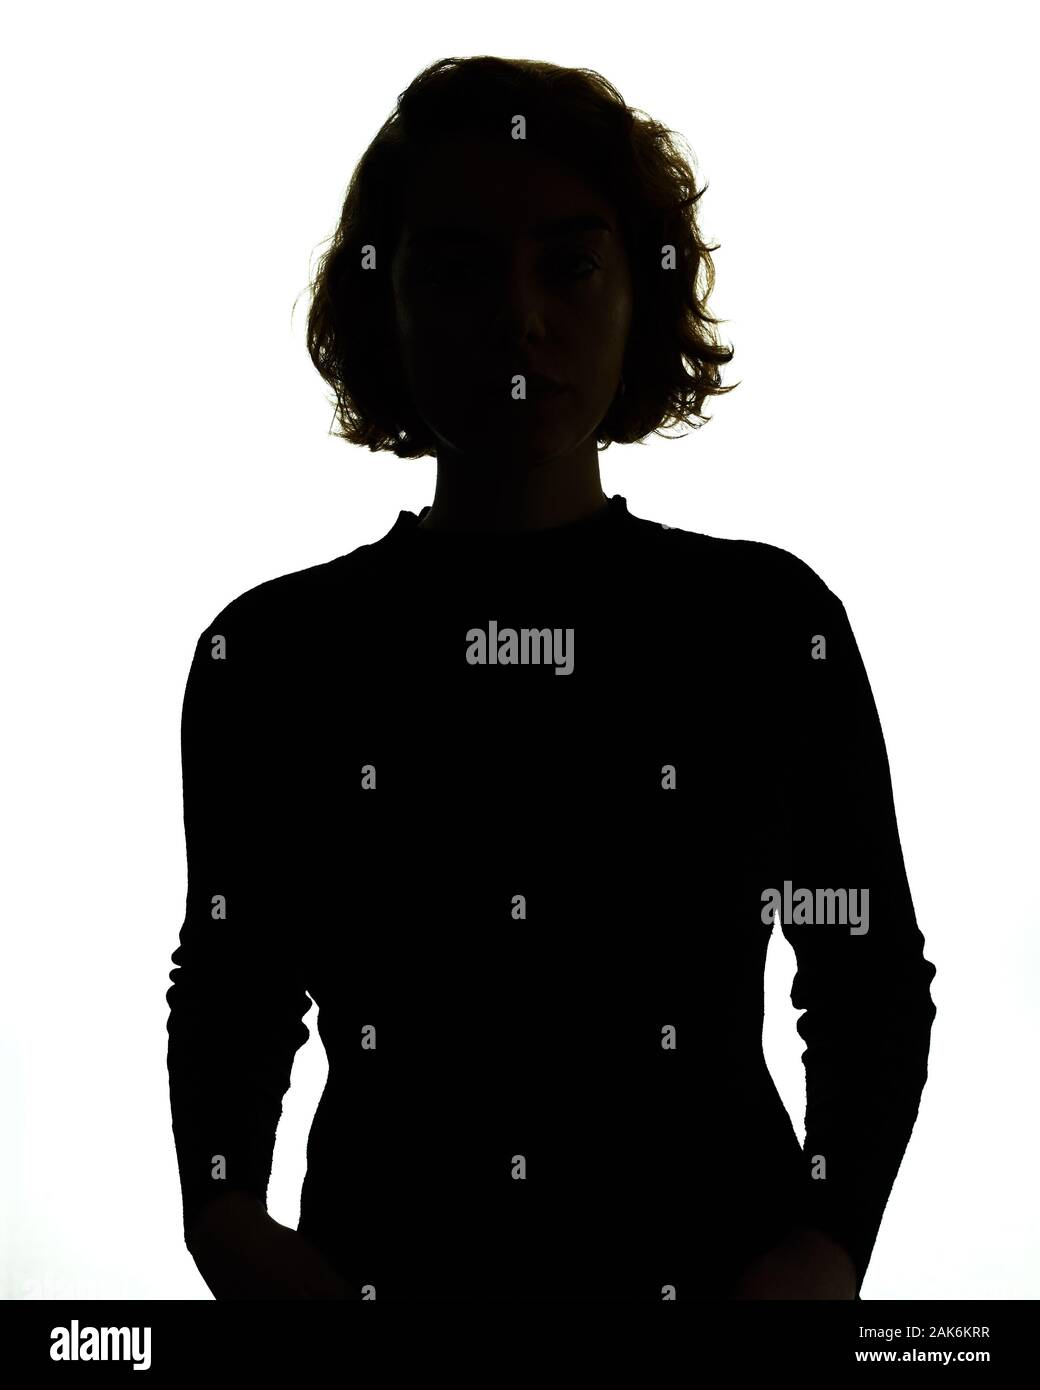 Silhouette of head and shoulders of a woman, backlit. Stock Photo